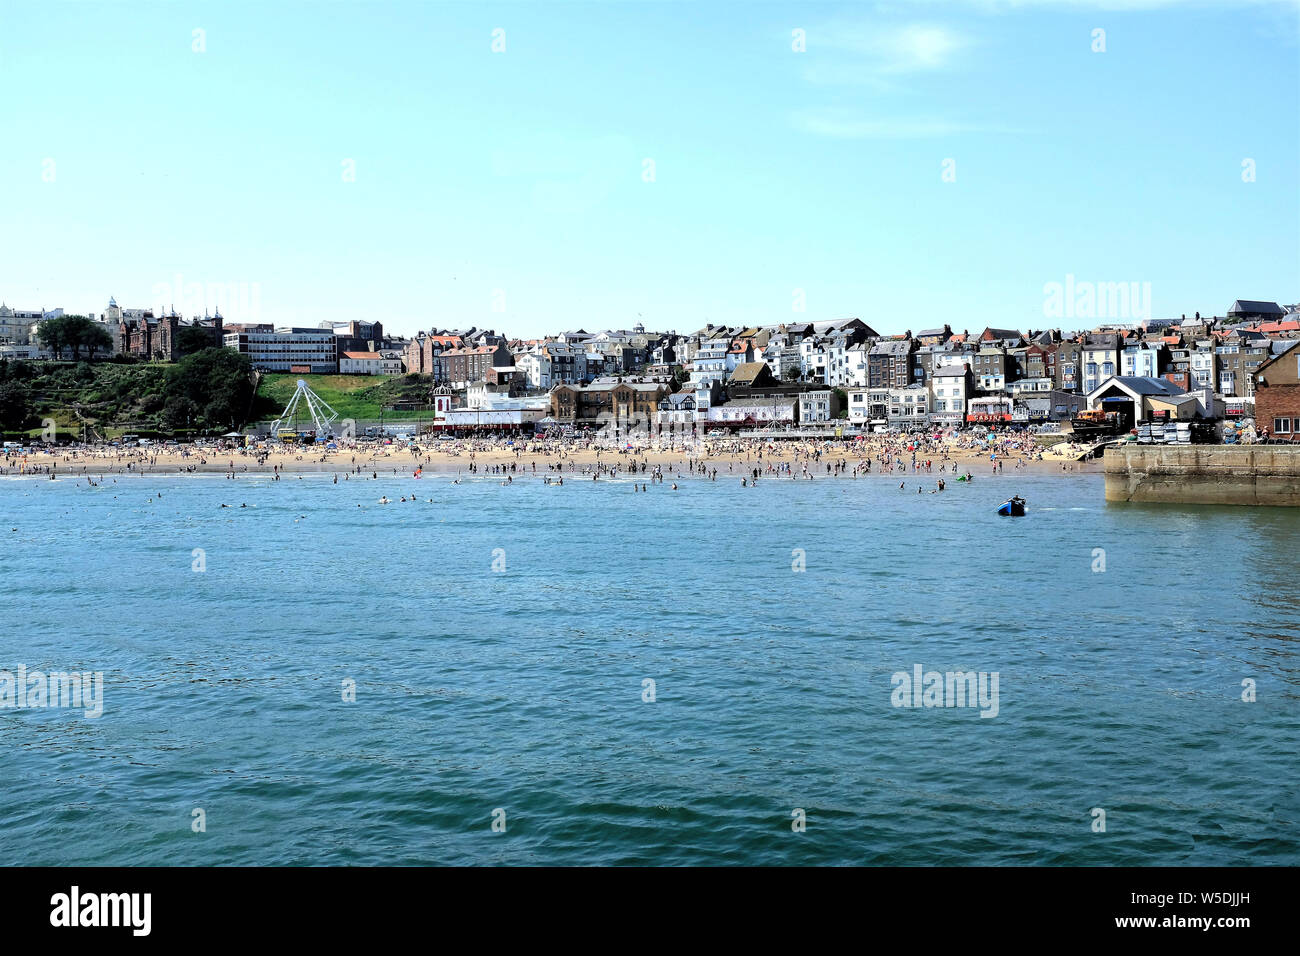 Scarborough, Yorkshire, UK. July 25, 2019. A busy South beach as holidaymakers enjoy a Summer day at the seaside taken from the pier at Scarborough in Stock Photo